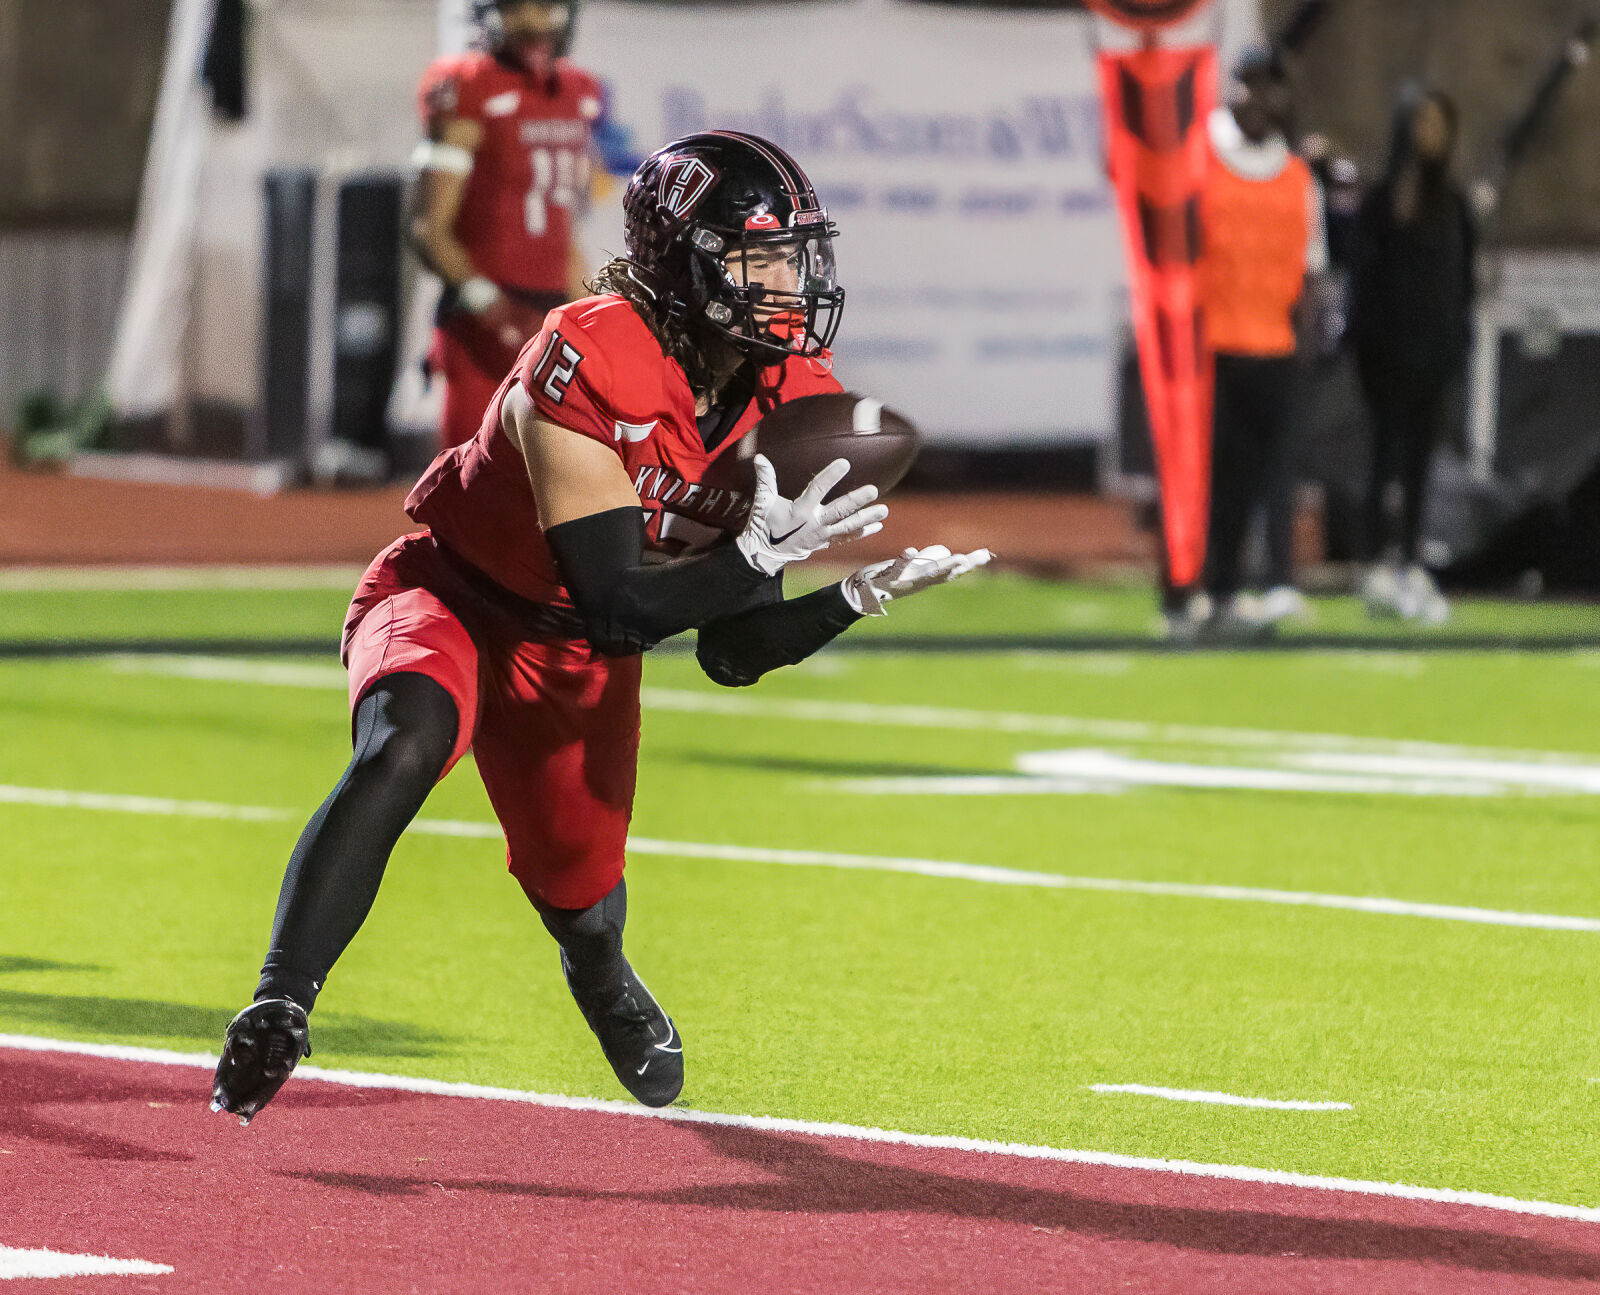 Chaparral hopes for favorable results to secure historic playoff berth, Harker Heights aims for district championship, Belton and Waco University set for highly anticipated matchup